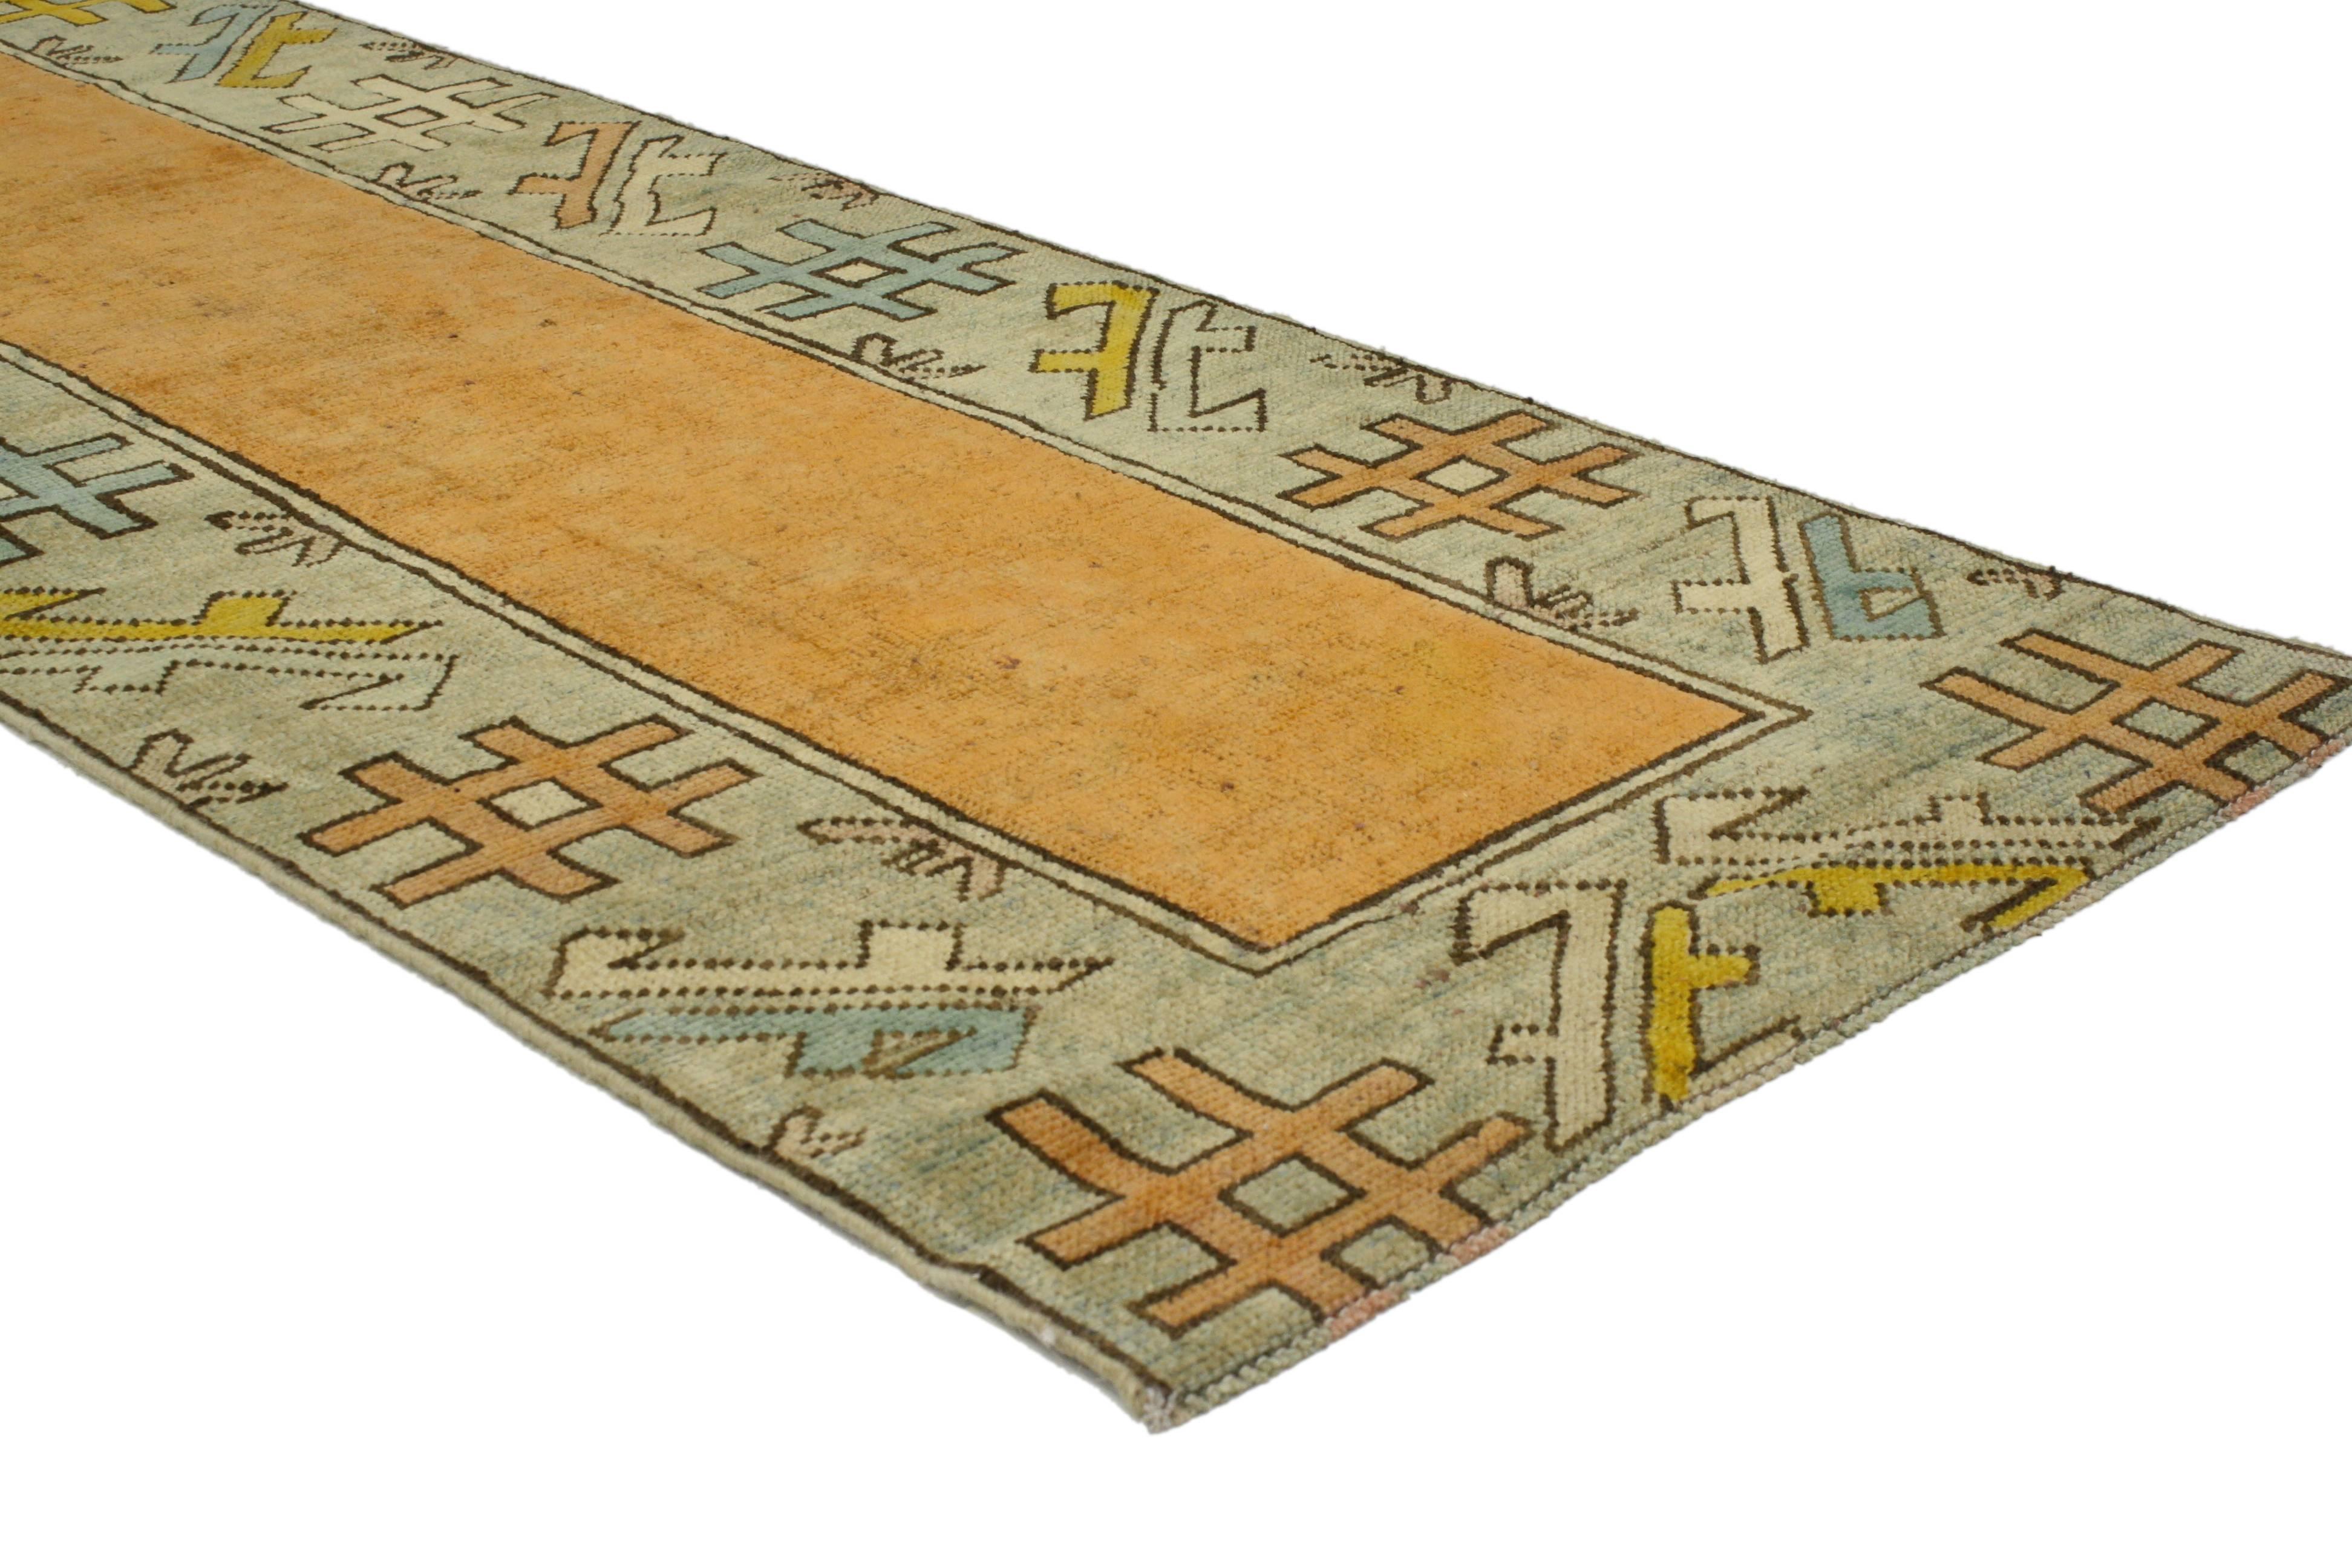 52050 Vintage Turkish Oushak Hallway Runner with International Art Deco Style. This hand-knotted wool vintage Turkish Oushak runner beautifully highlights Art Deco and International style. It features a vibrant orange field. The vintage Oushak